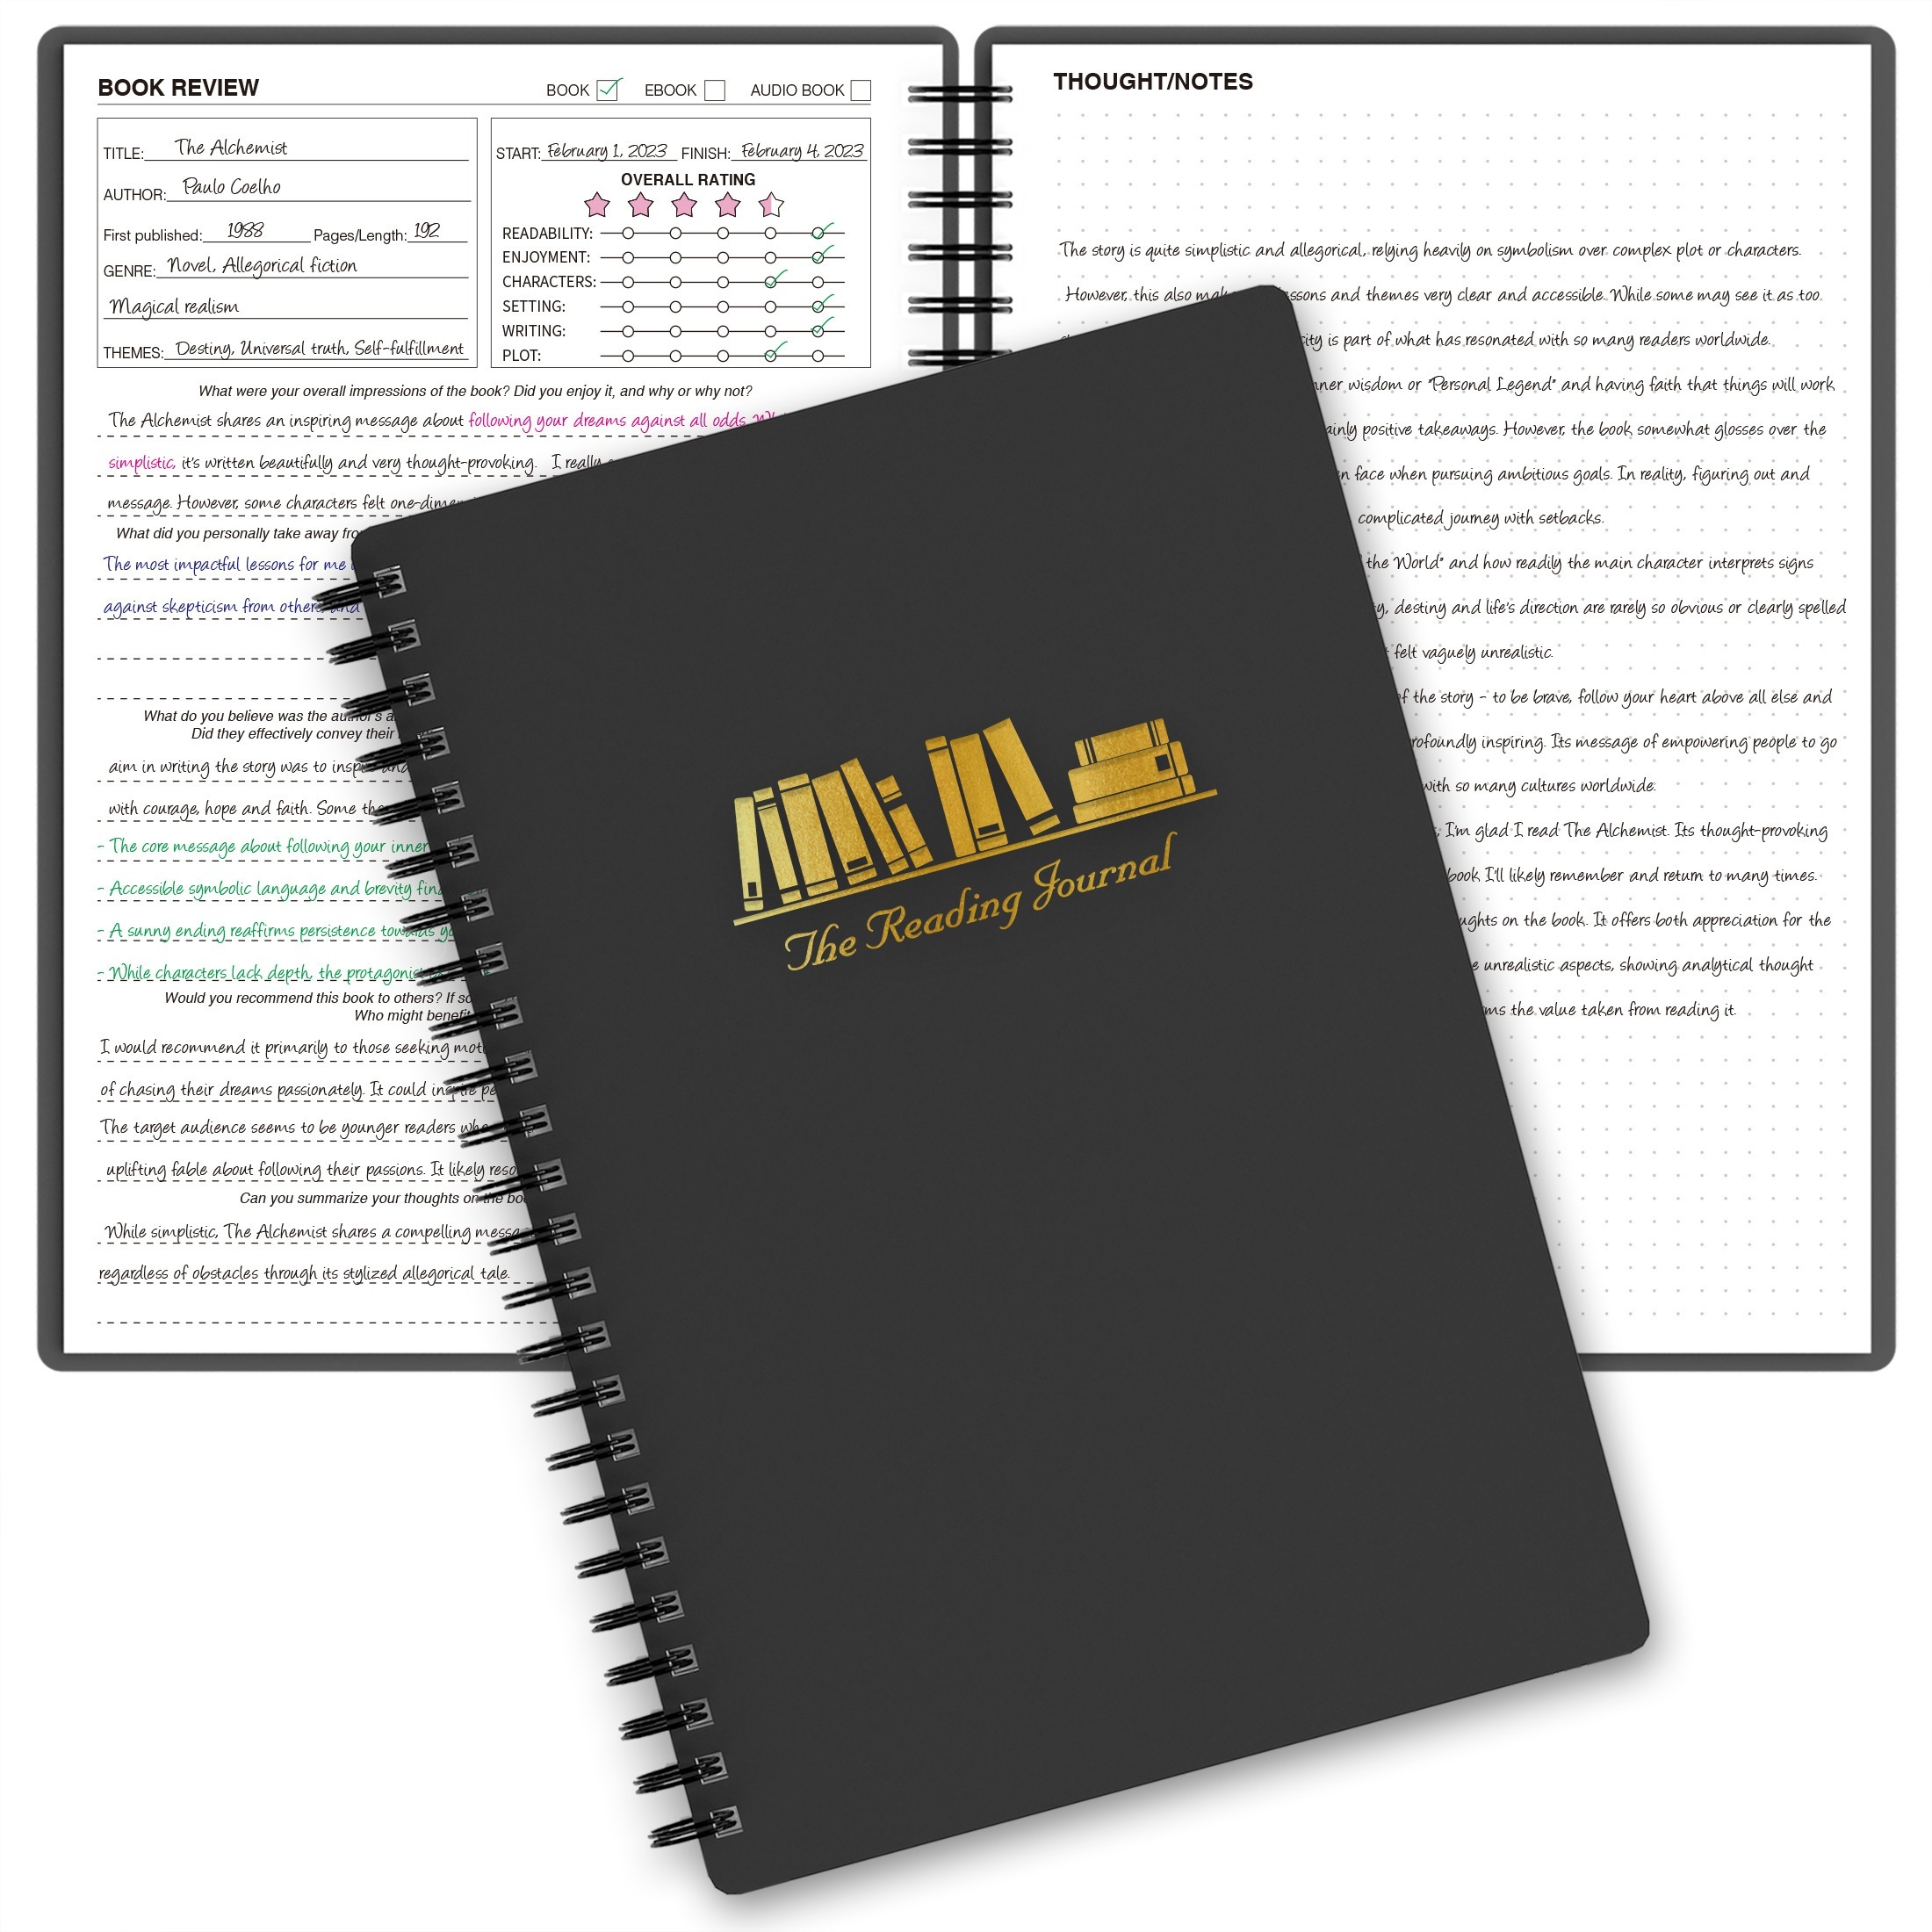 Book journal | Reading log: Track all your reading reviews in this compact  6x9 log book | notebook. Write your favorite quotes and book summary. Cute